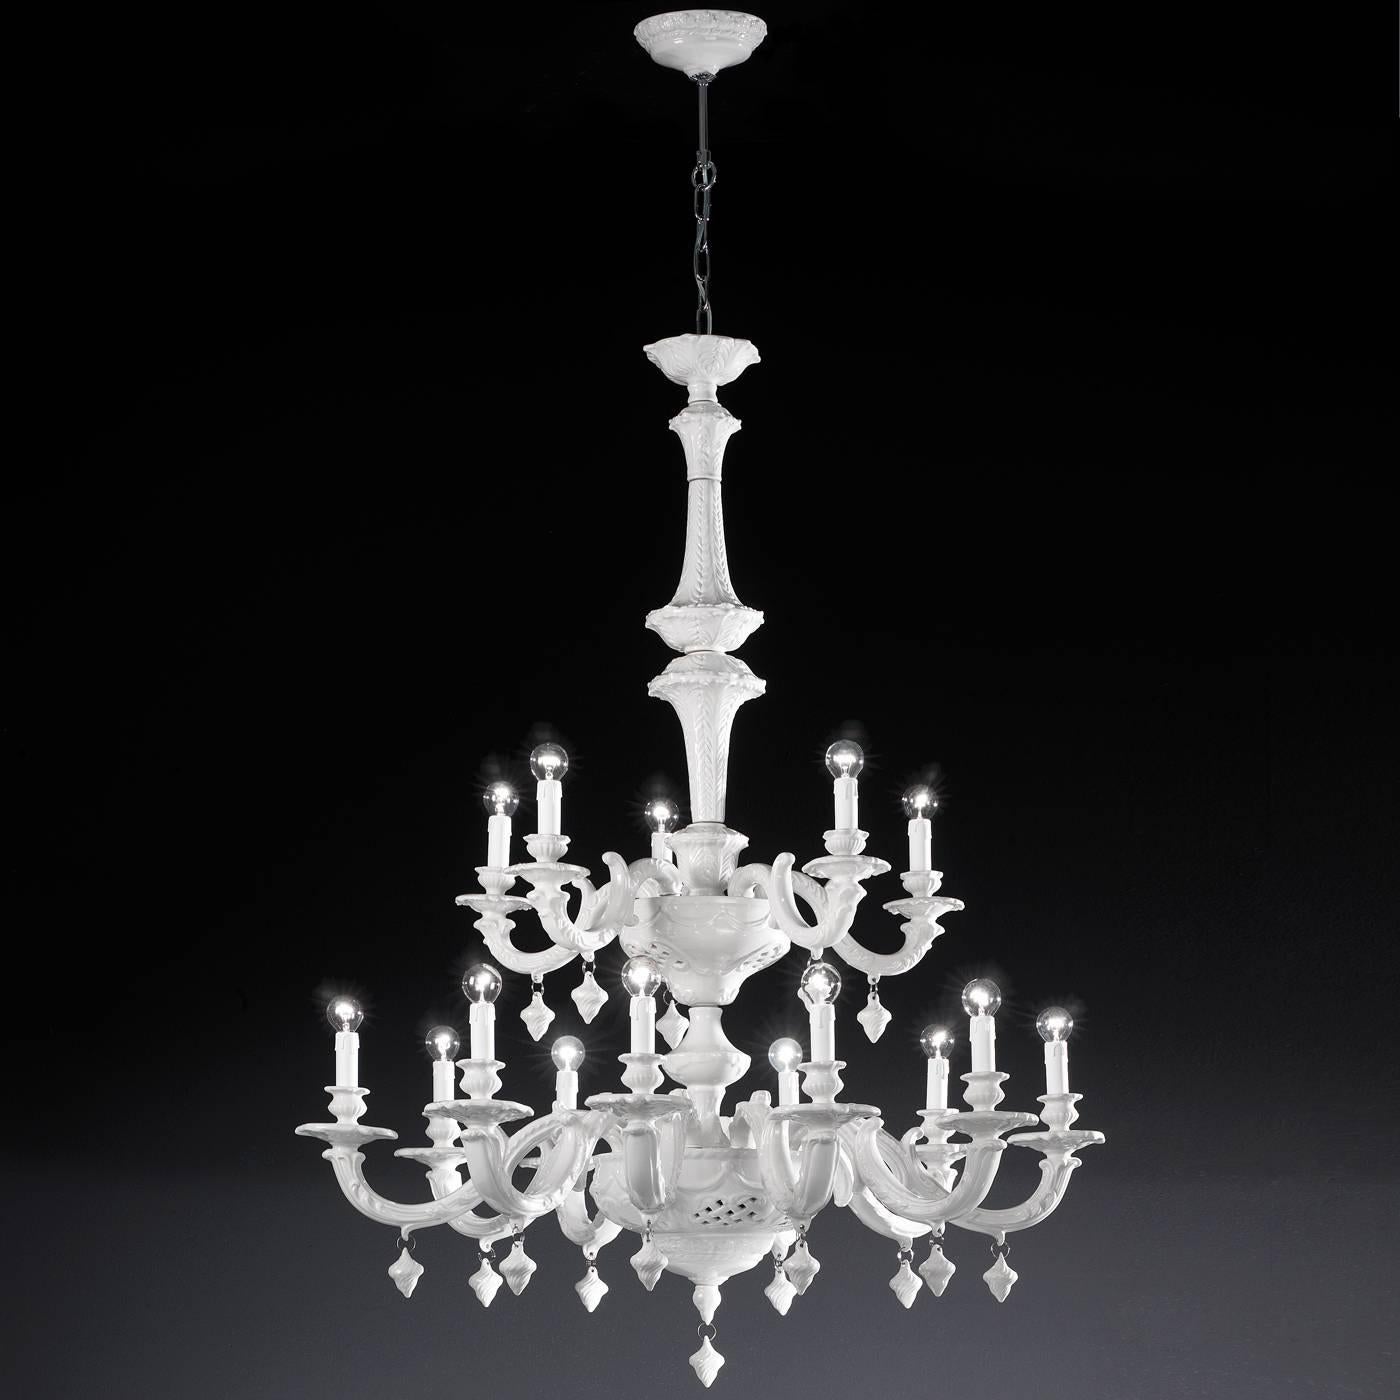 The best seller of the collection, this piece was chosen by famous architect Renzo Piano for his home. This magnificent fifteen-light chandelier creates a luxurious environment anywhere it is placed. This exquisite two level piece features ten